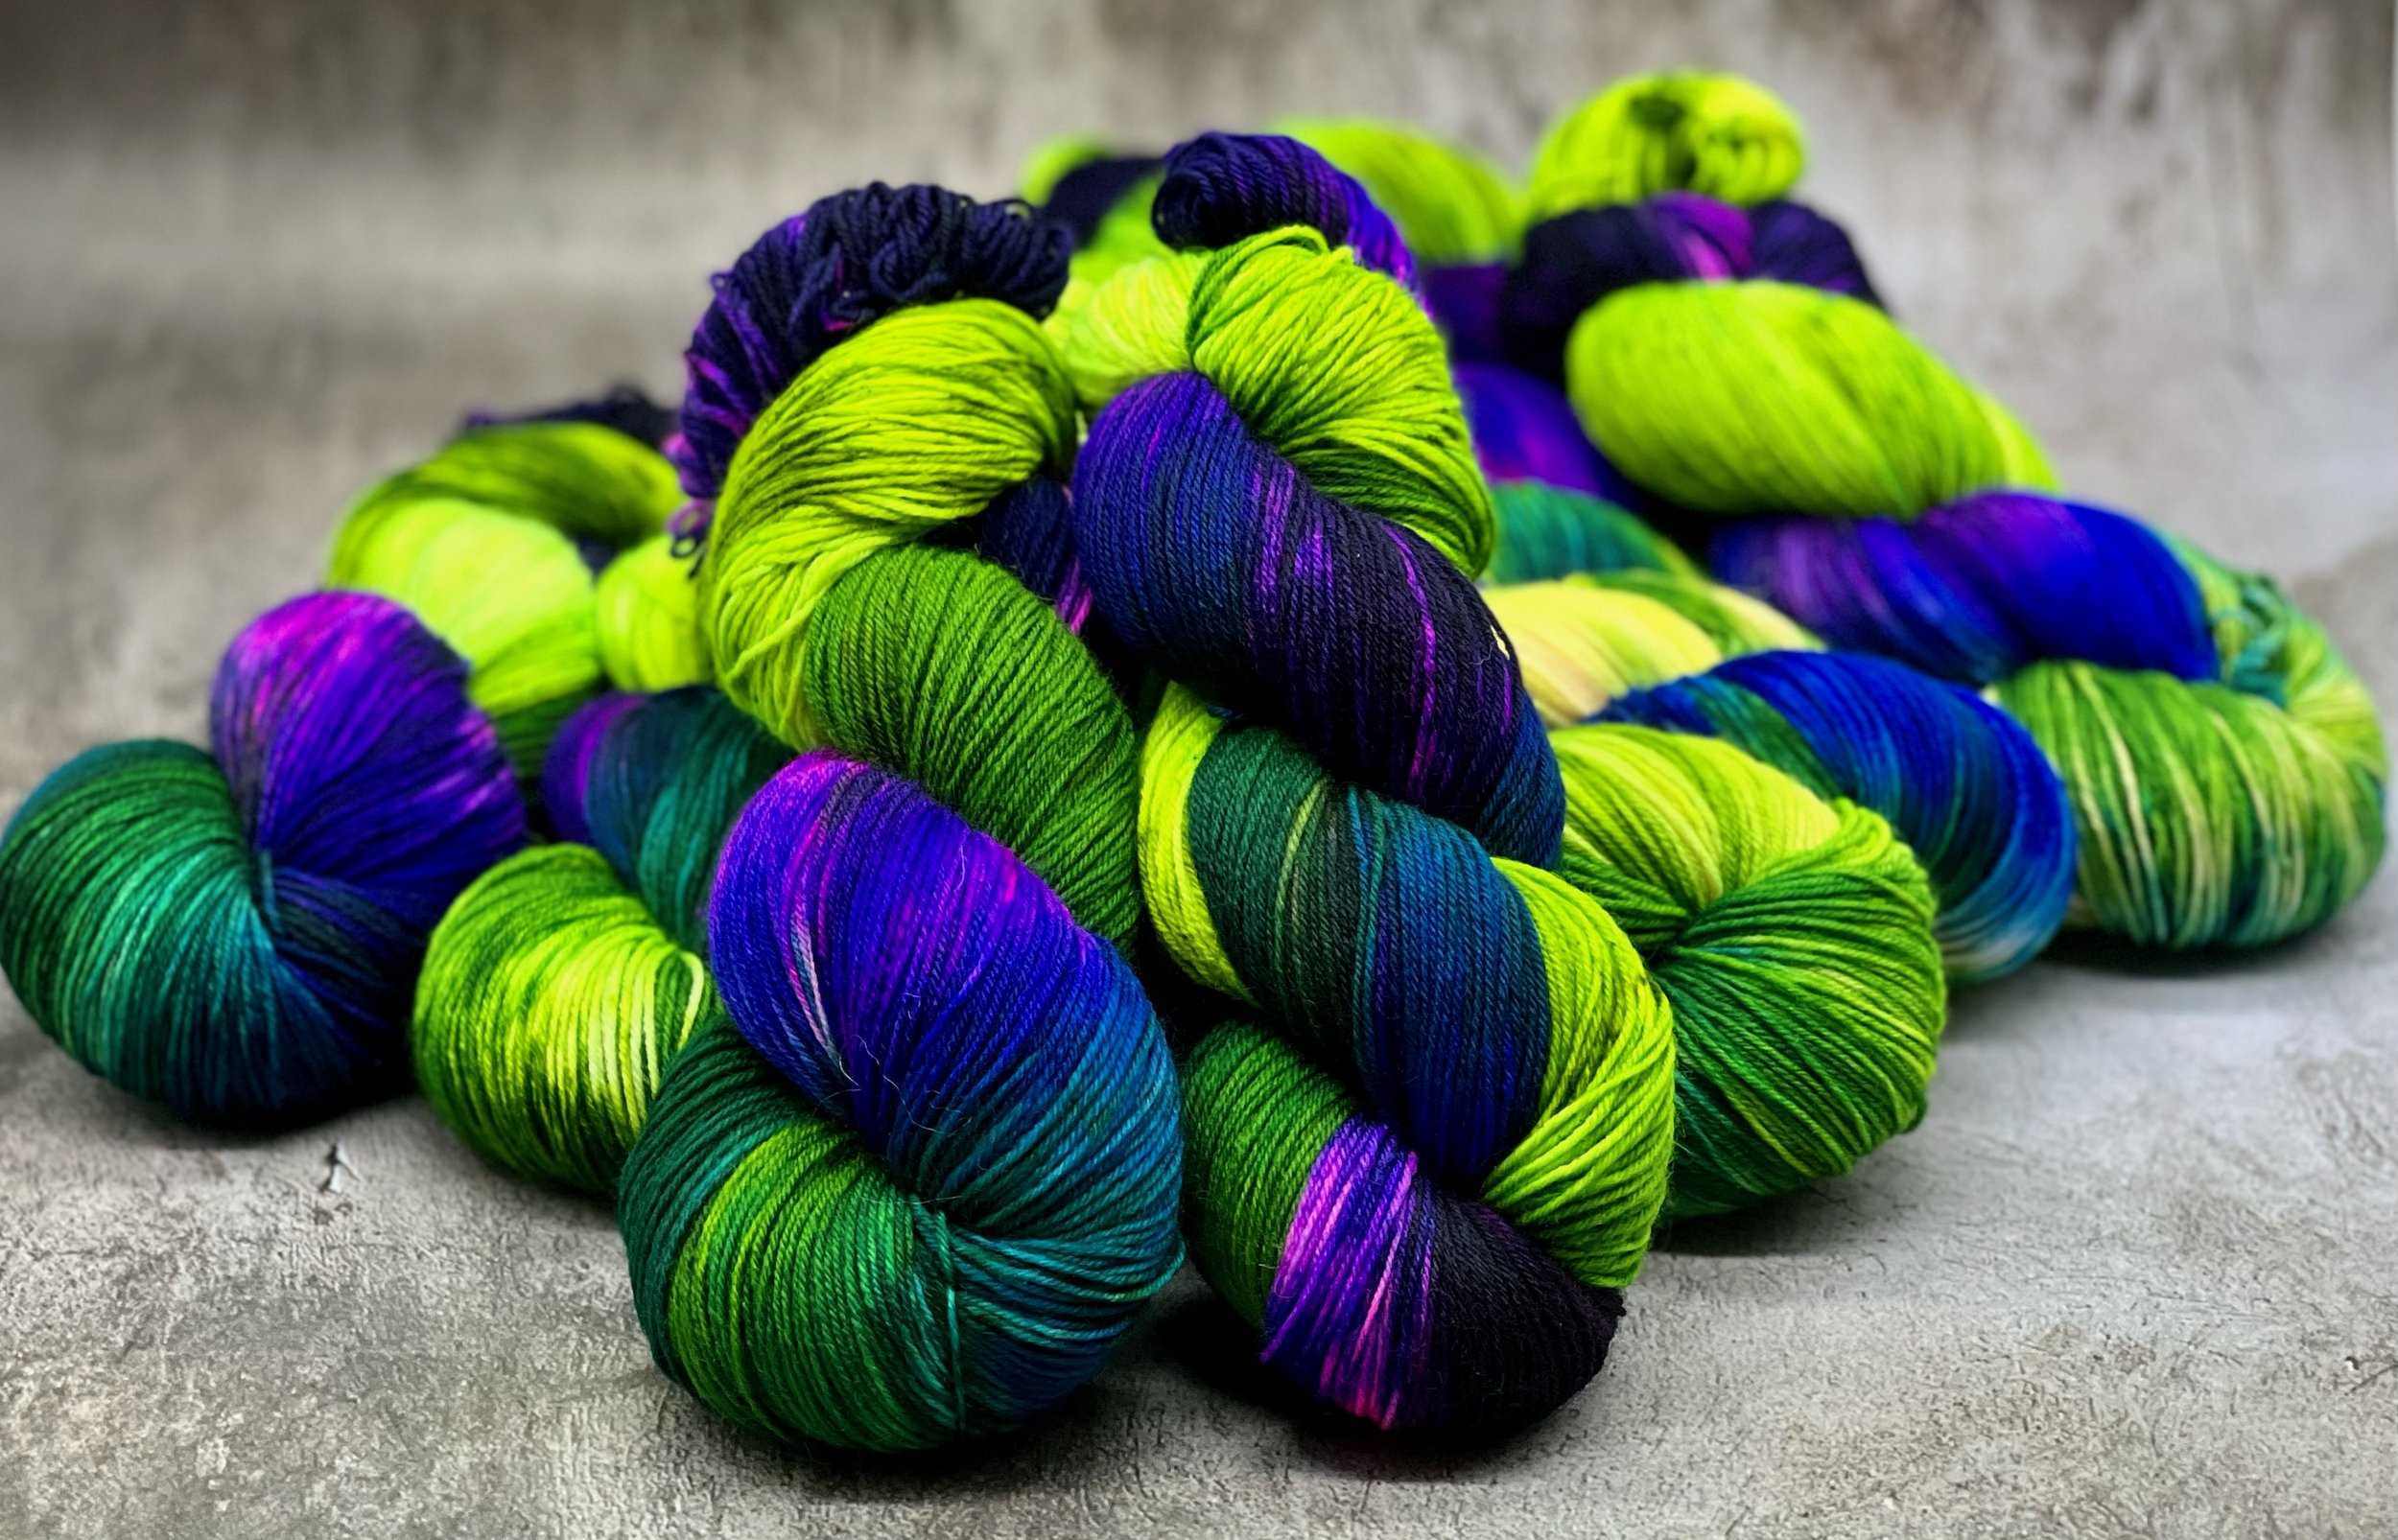 Hand-Dyed Cashmere Yarn Blend for Crochet and Knitting